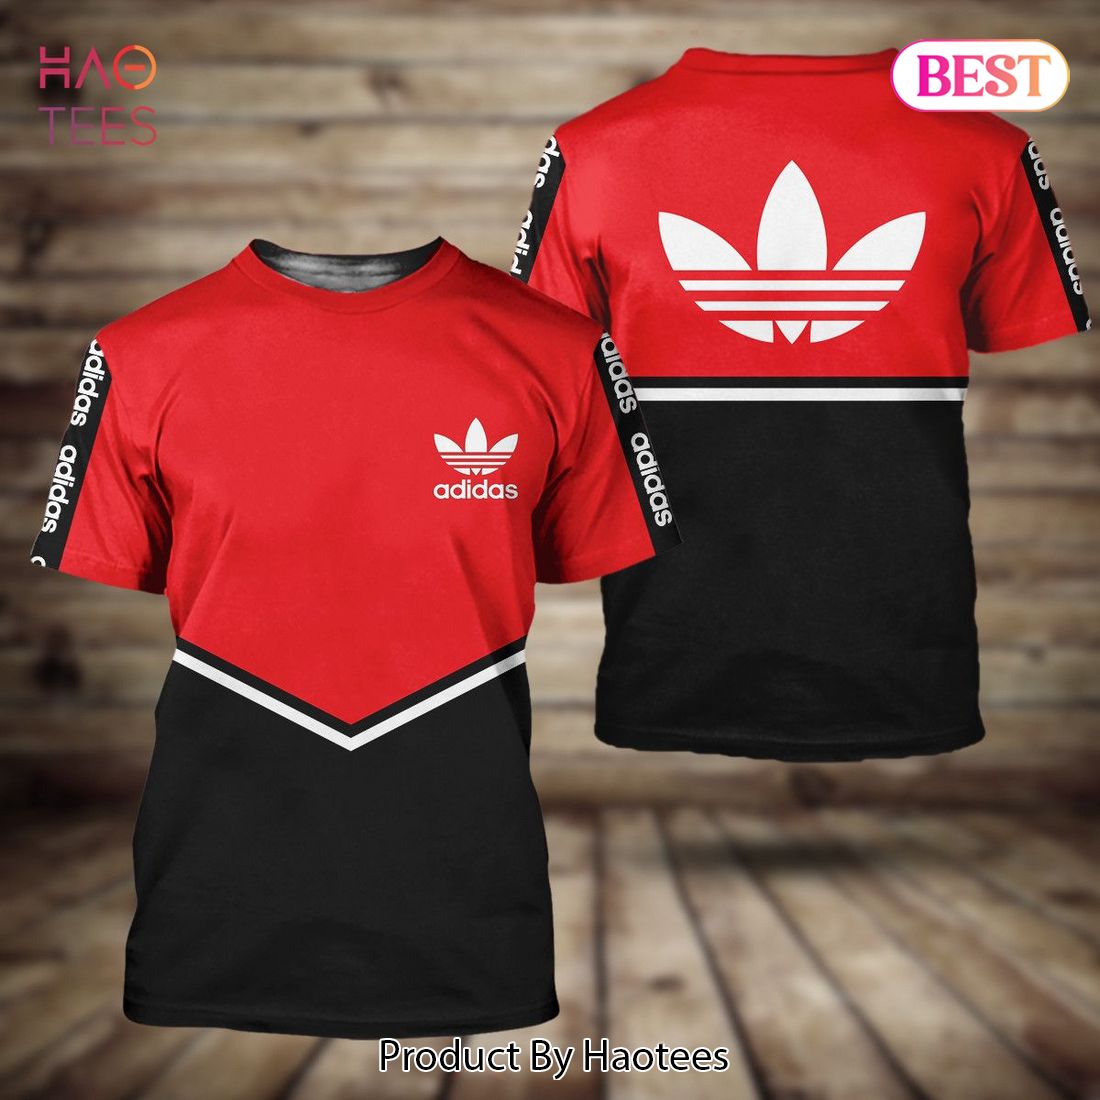 THE BEST Adidas 3D T-Shirt Red Mix Luxury Color POD Design